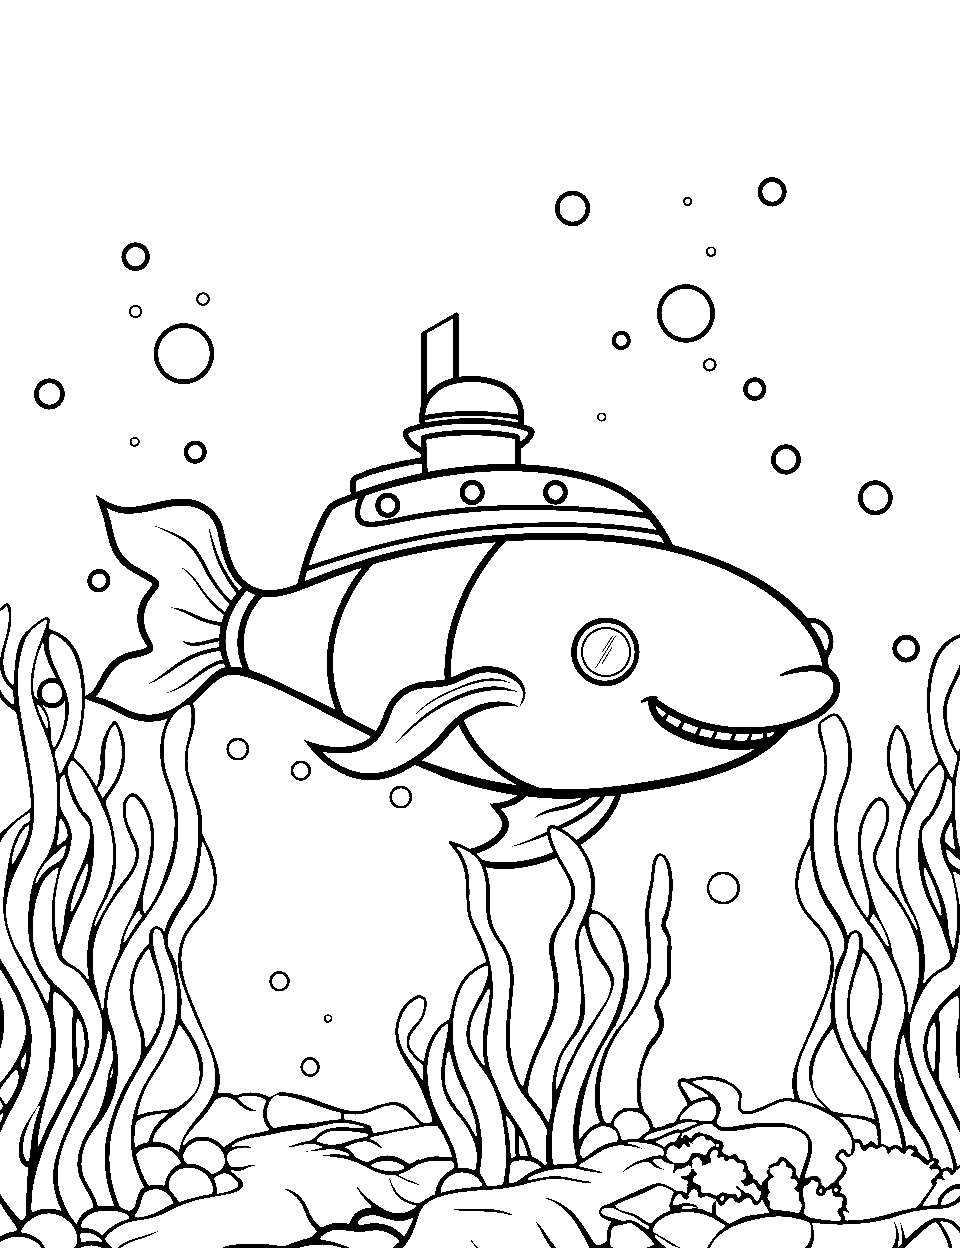 Fish Submarine Under the Sea Ocean Coloring Page - A submarine designed to look like a fish exploring the ocean depths.